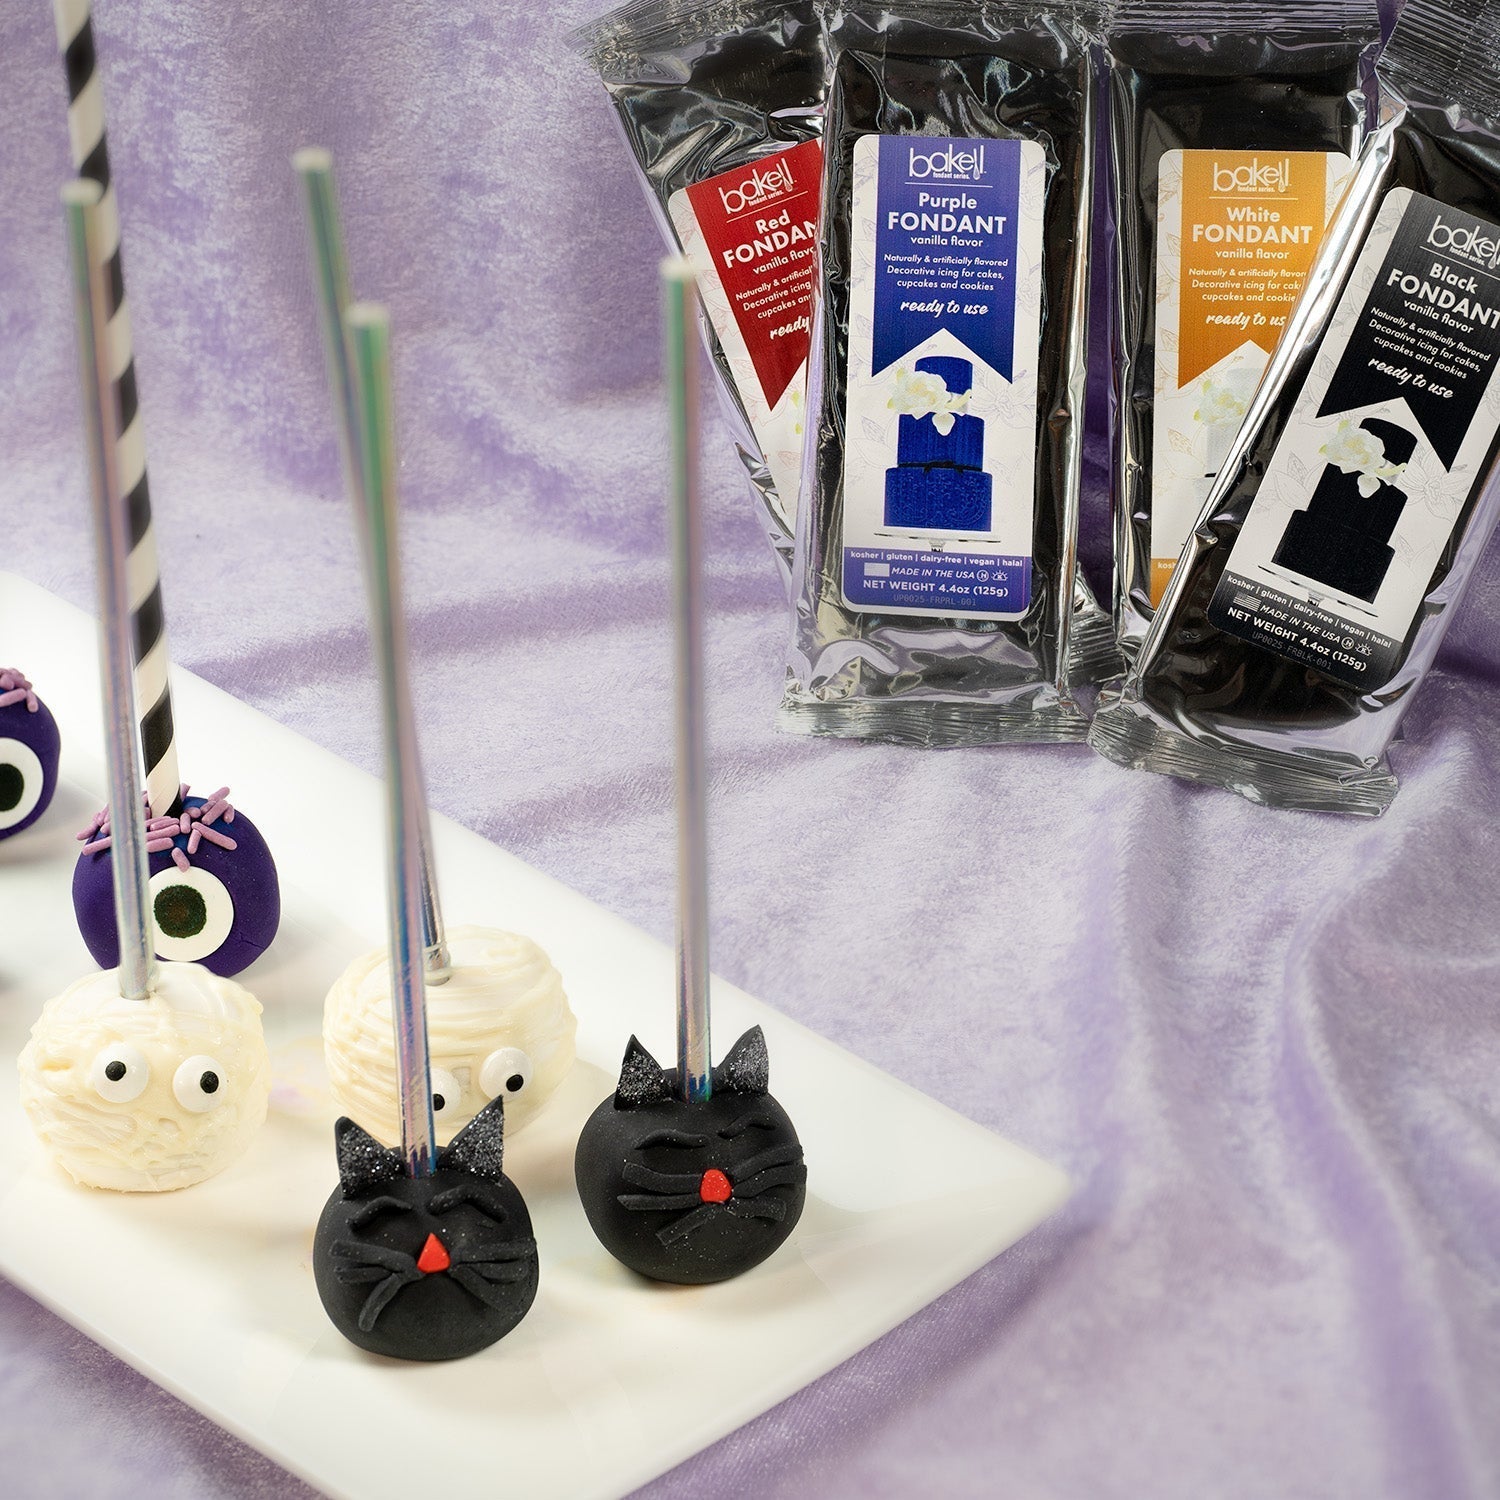 Halloween Cake pops Are The Perfect Sweet Treat!-Bakell®